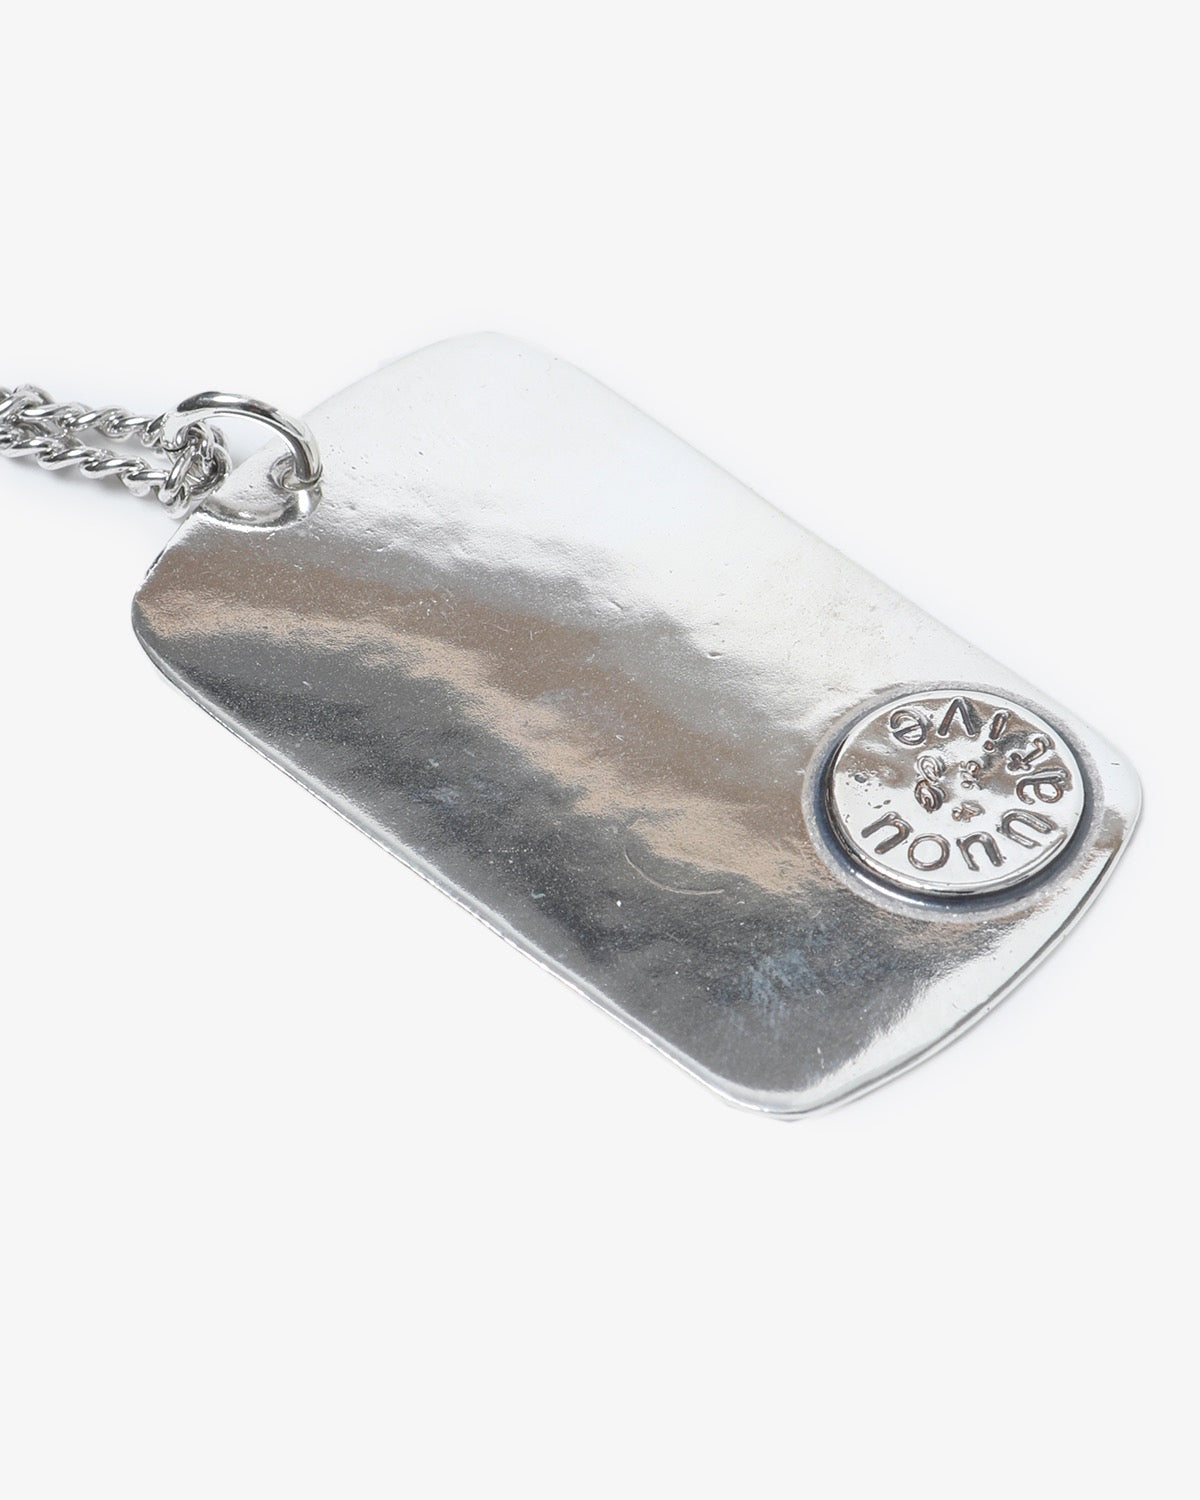 TROOPER NECKLACE "ID TAG" 925 SILVER by END